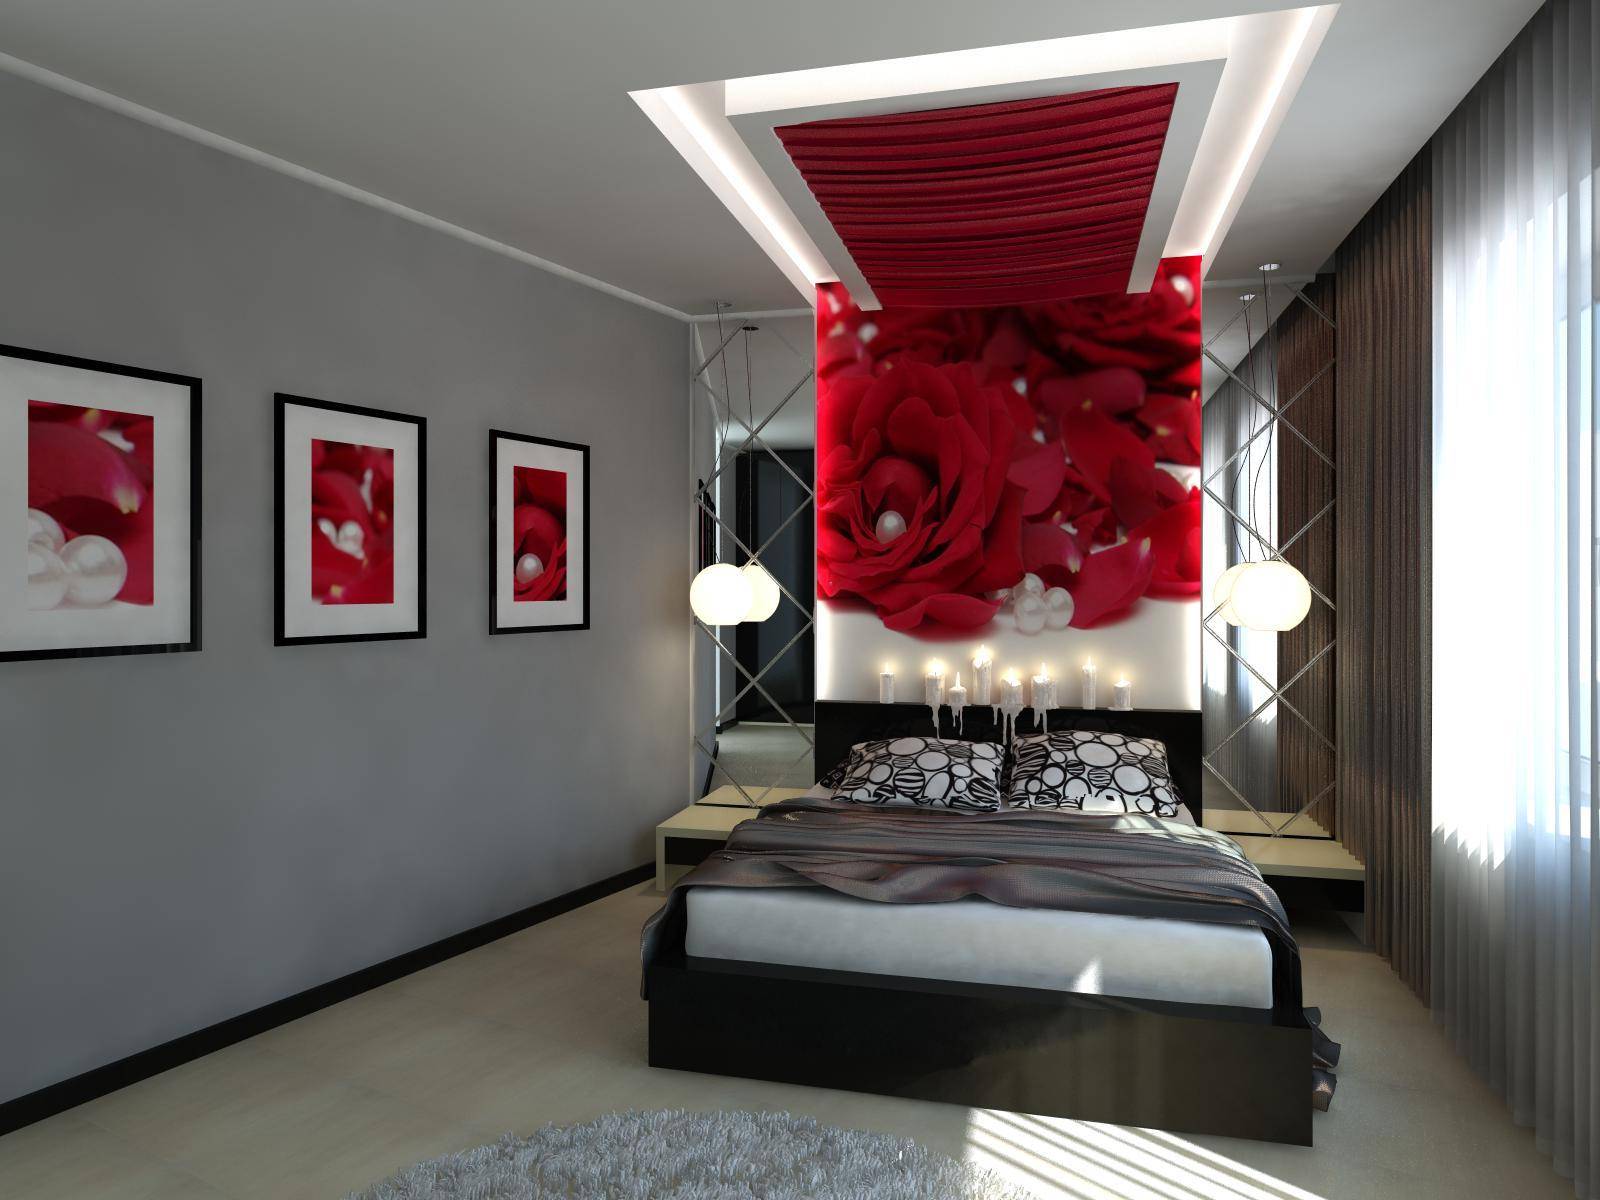 Creatice Red And Grey Room Ideas for Small Space